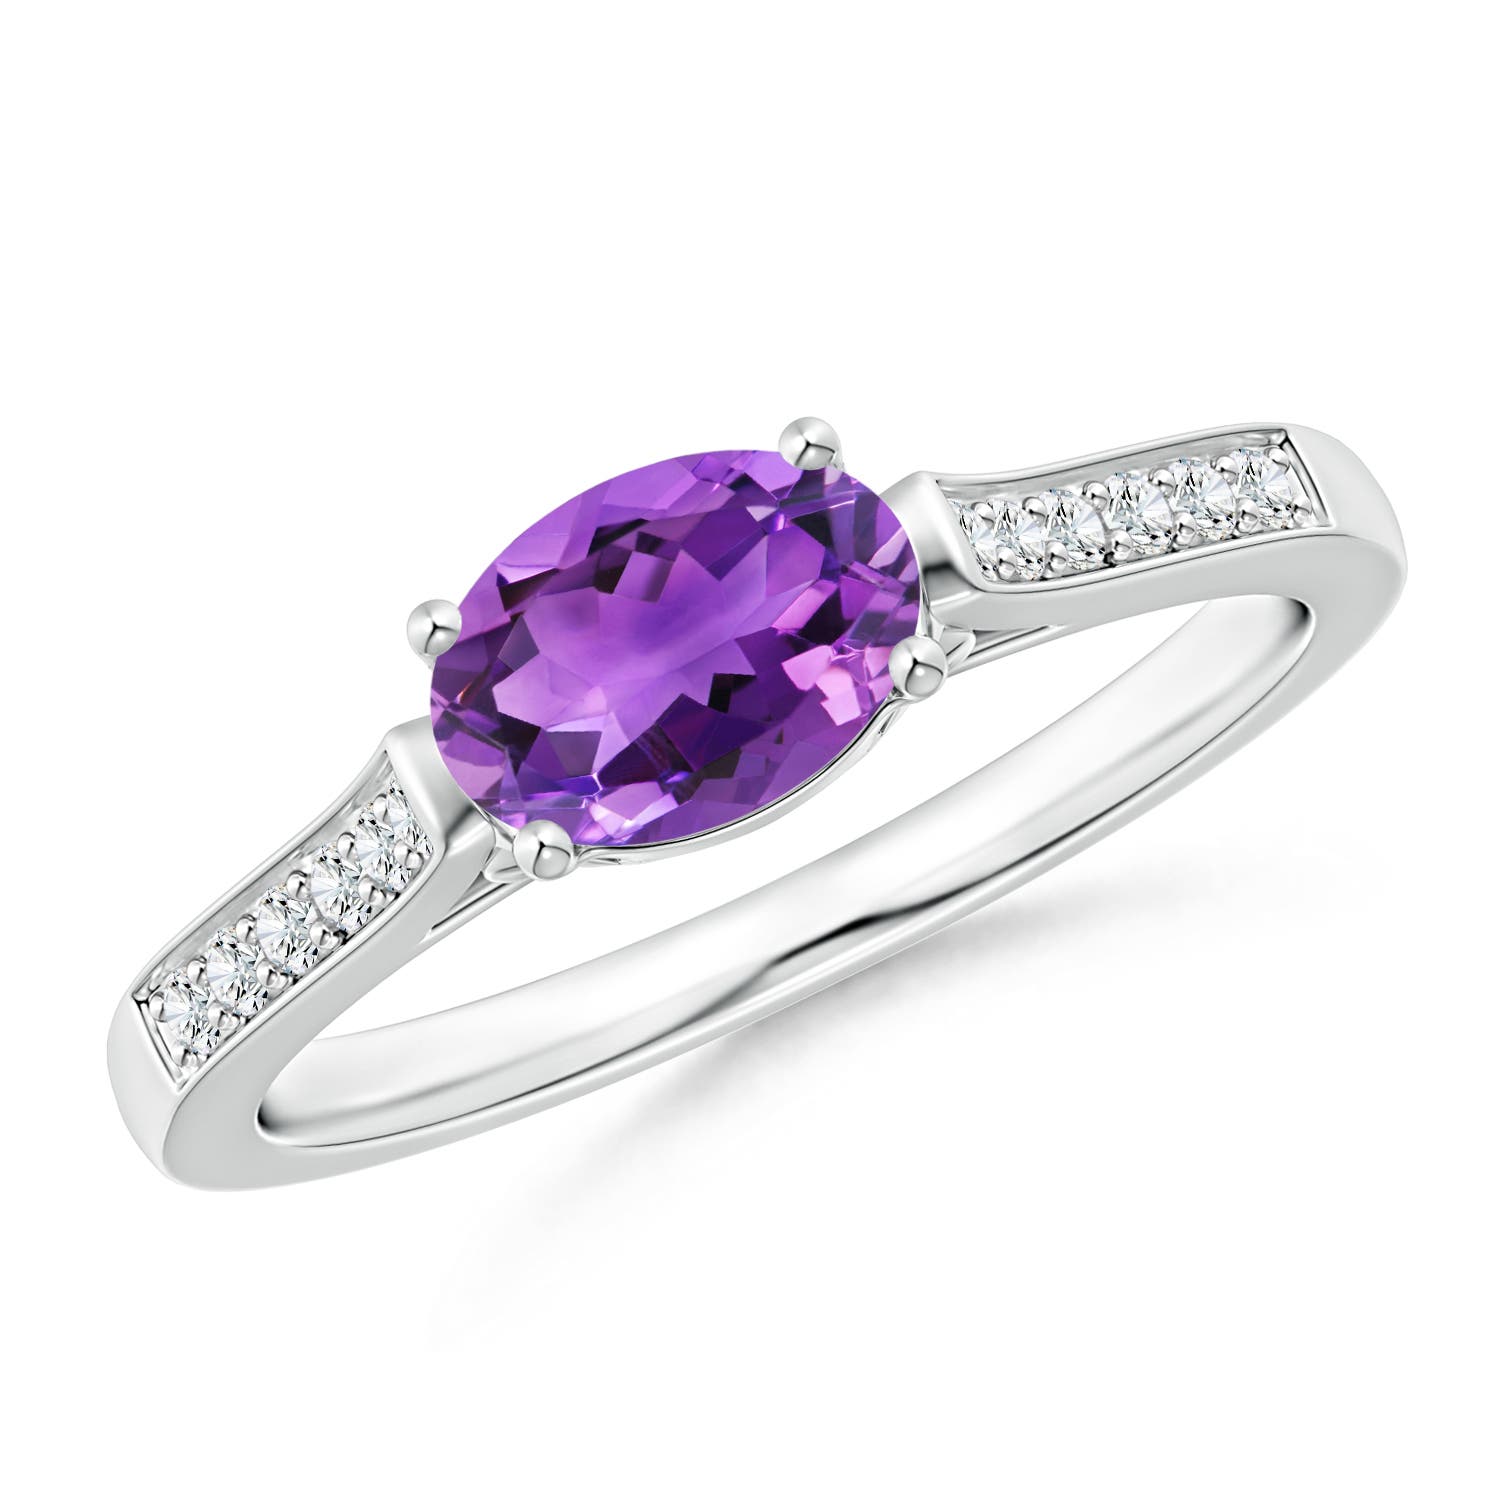 AAA - Amethyst / 0.82 CT / 14 KT White Gold